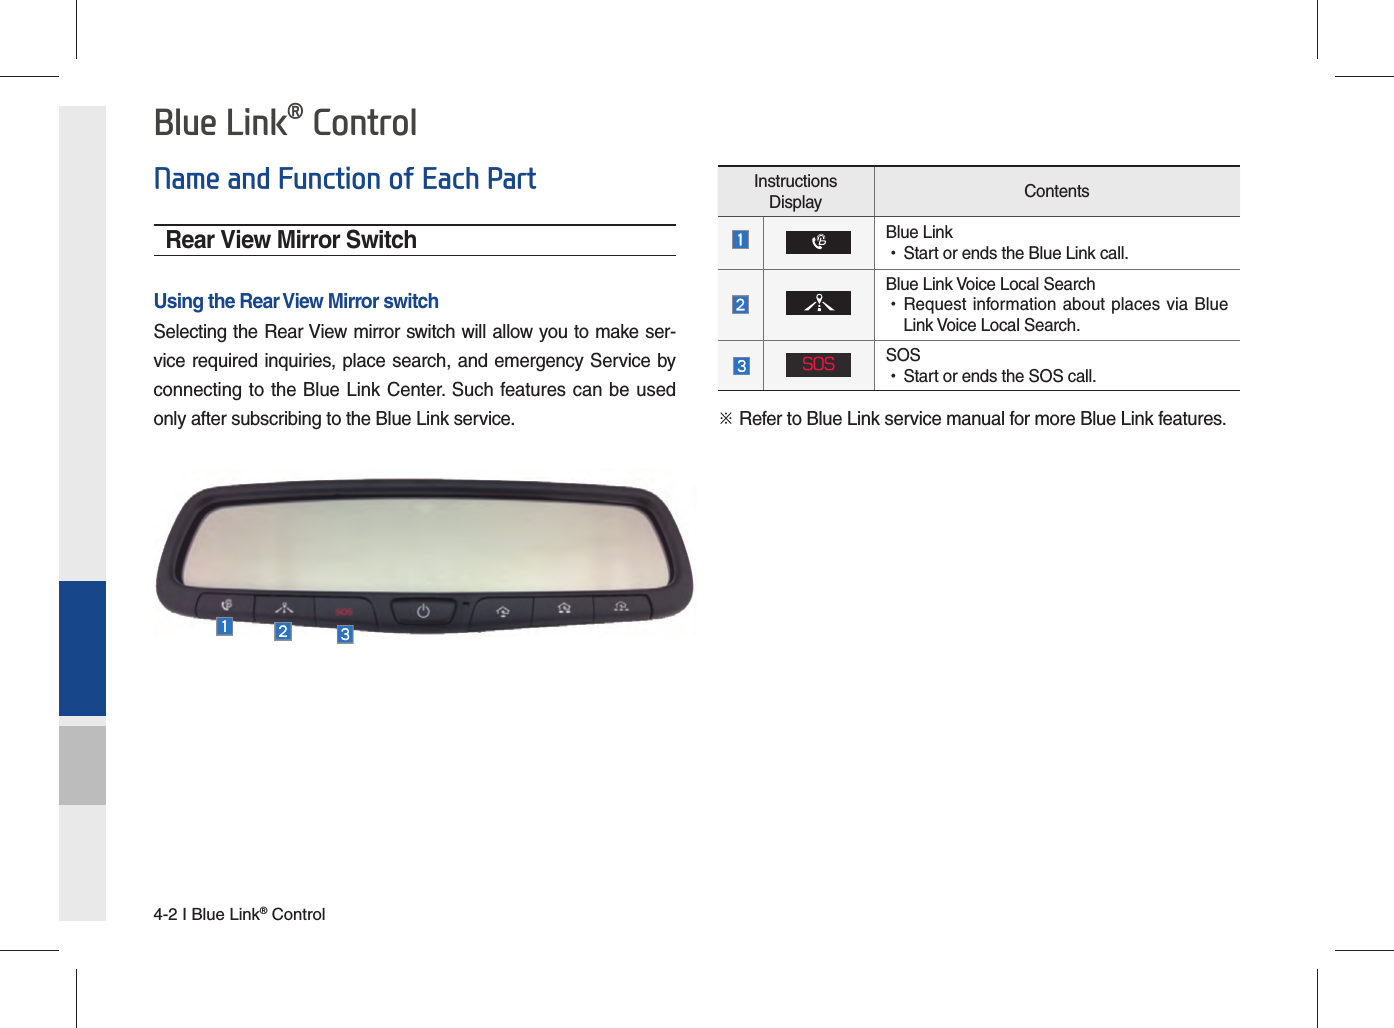 4-2 I Blue Link® ControlBlue Link® ControlRear View Mirror SwitchUsing the Rear View Mirror switchSelecting the Rear View mirror switch will allow you to make ser-vice required inquiries, place search, and emergency Service by connecting to the Blue Link Center. Such features can be used only after subscribing to the Blue Link service.Instructions Display ContentsBlue Link  •Start or ends the Blue Link call.Blue Link Voice Local Search •Request information about places via Blue Link Voice Local Search.SOSSOS •Start or ends the SOS call.Name and Function of Each Part※ Refer to Blue Link service manual for more Blue Link features.